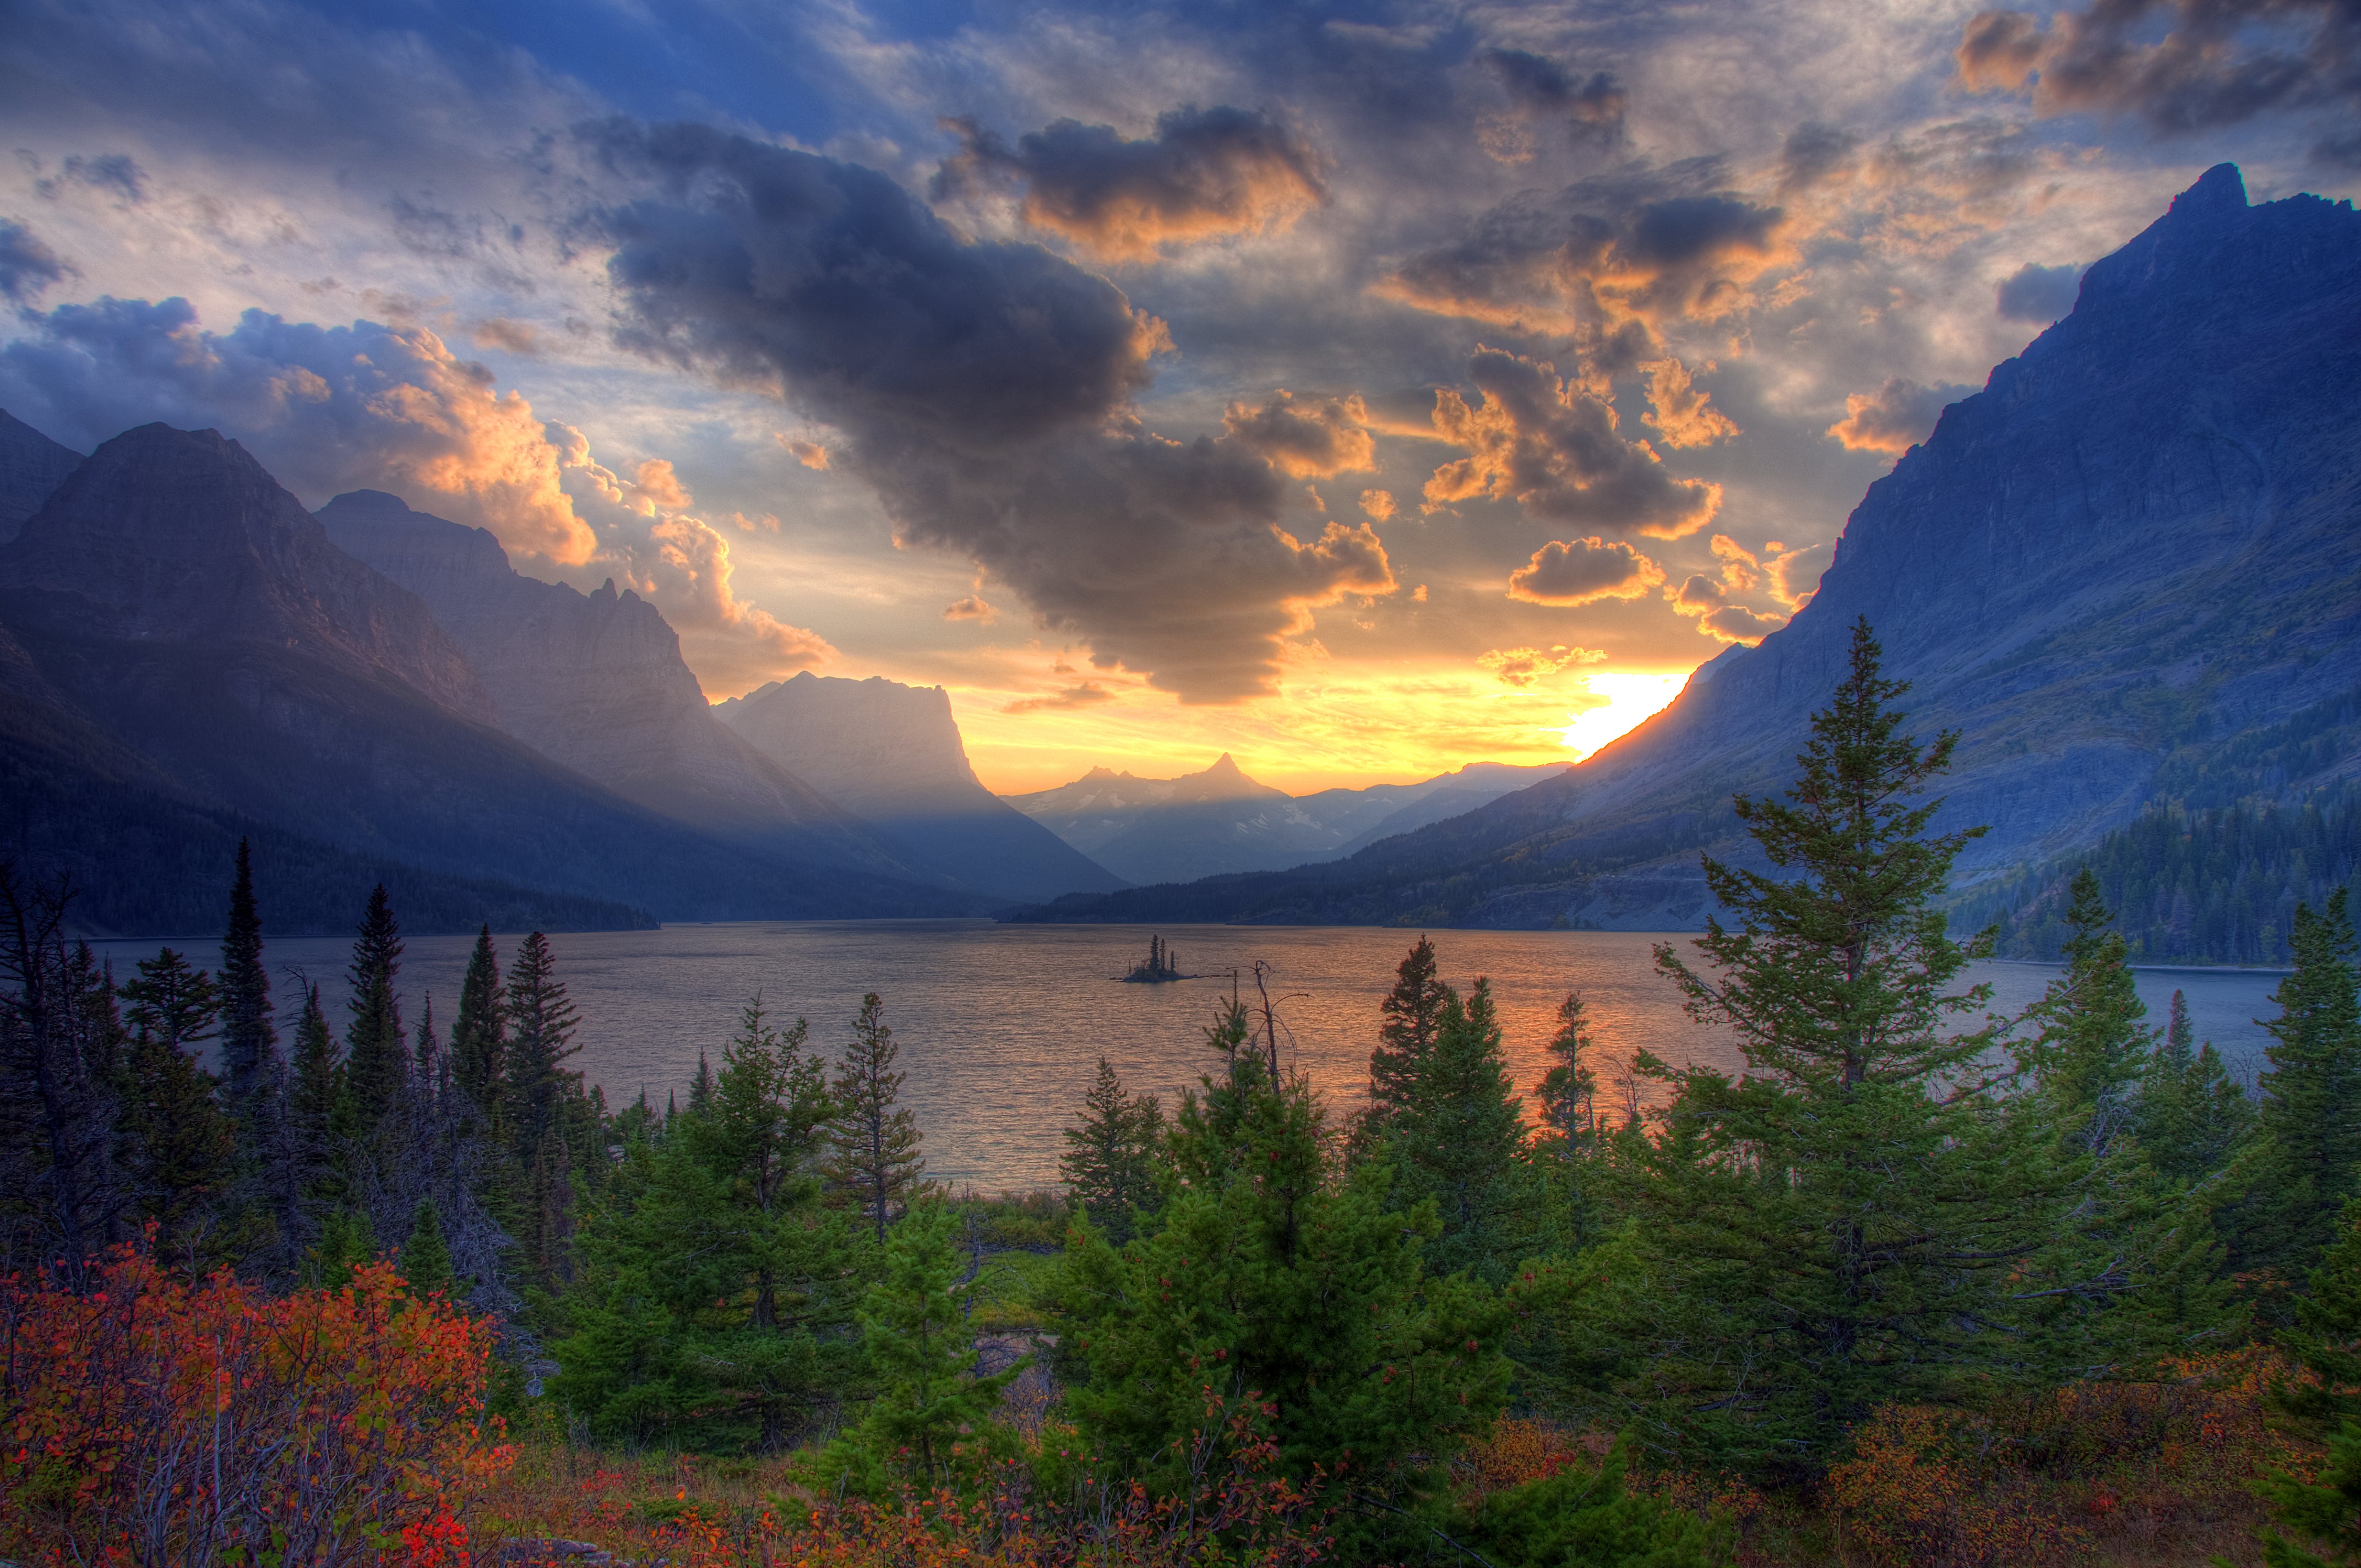 Trip Notes: A First Timers Guide to Glacier National Park